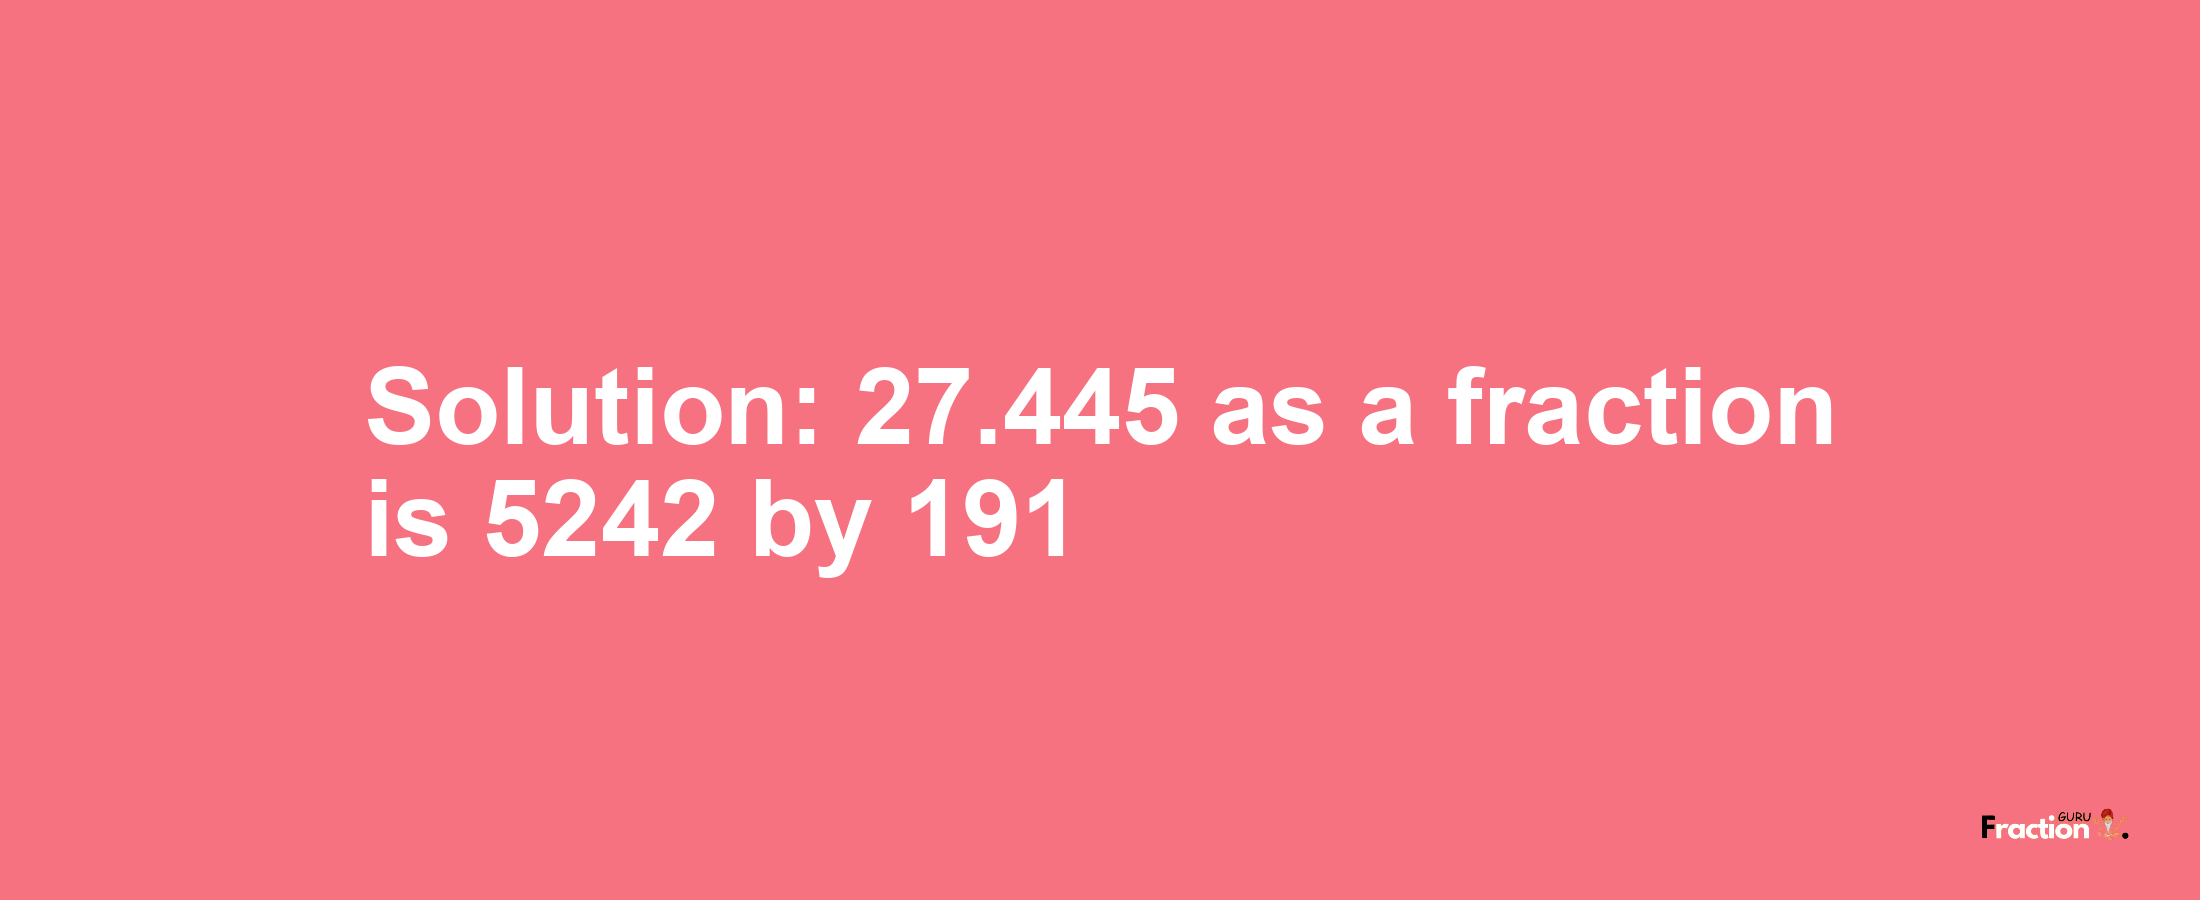 Solution:27.445 as a fraction is 5242/191